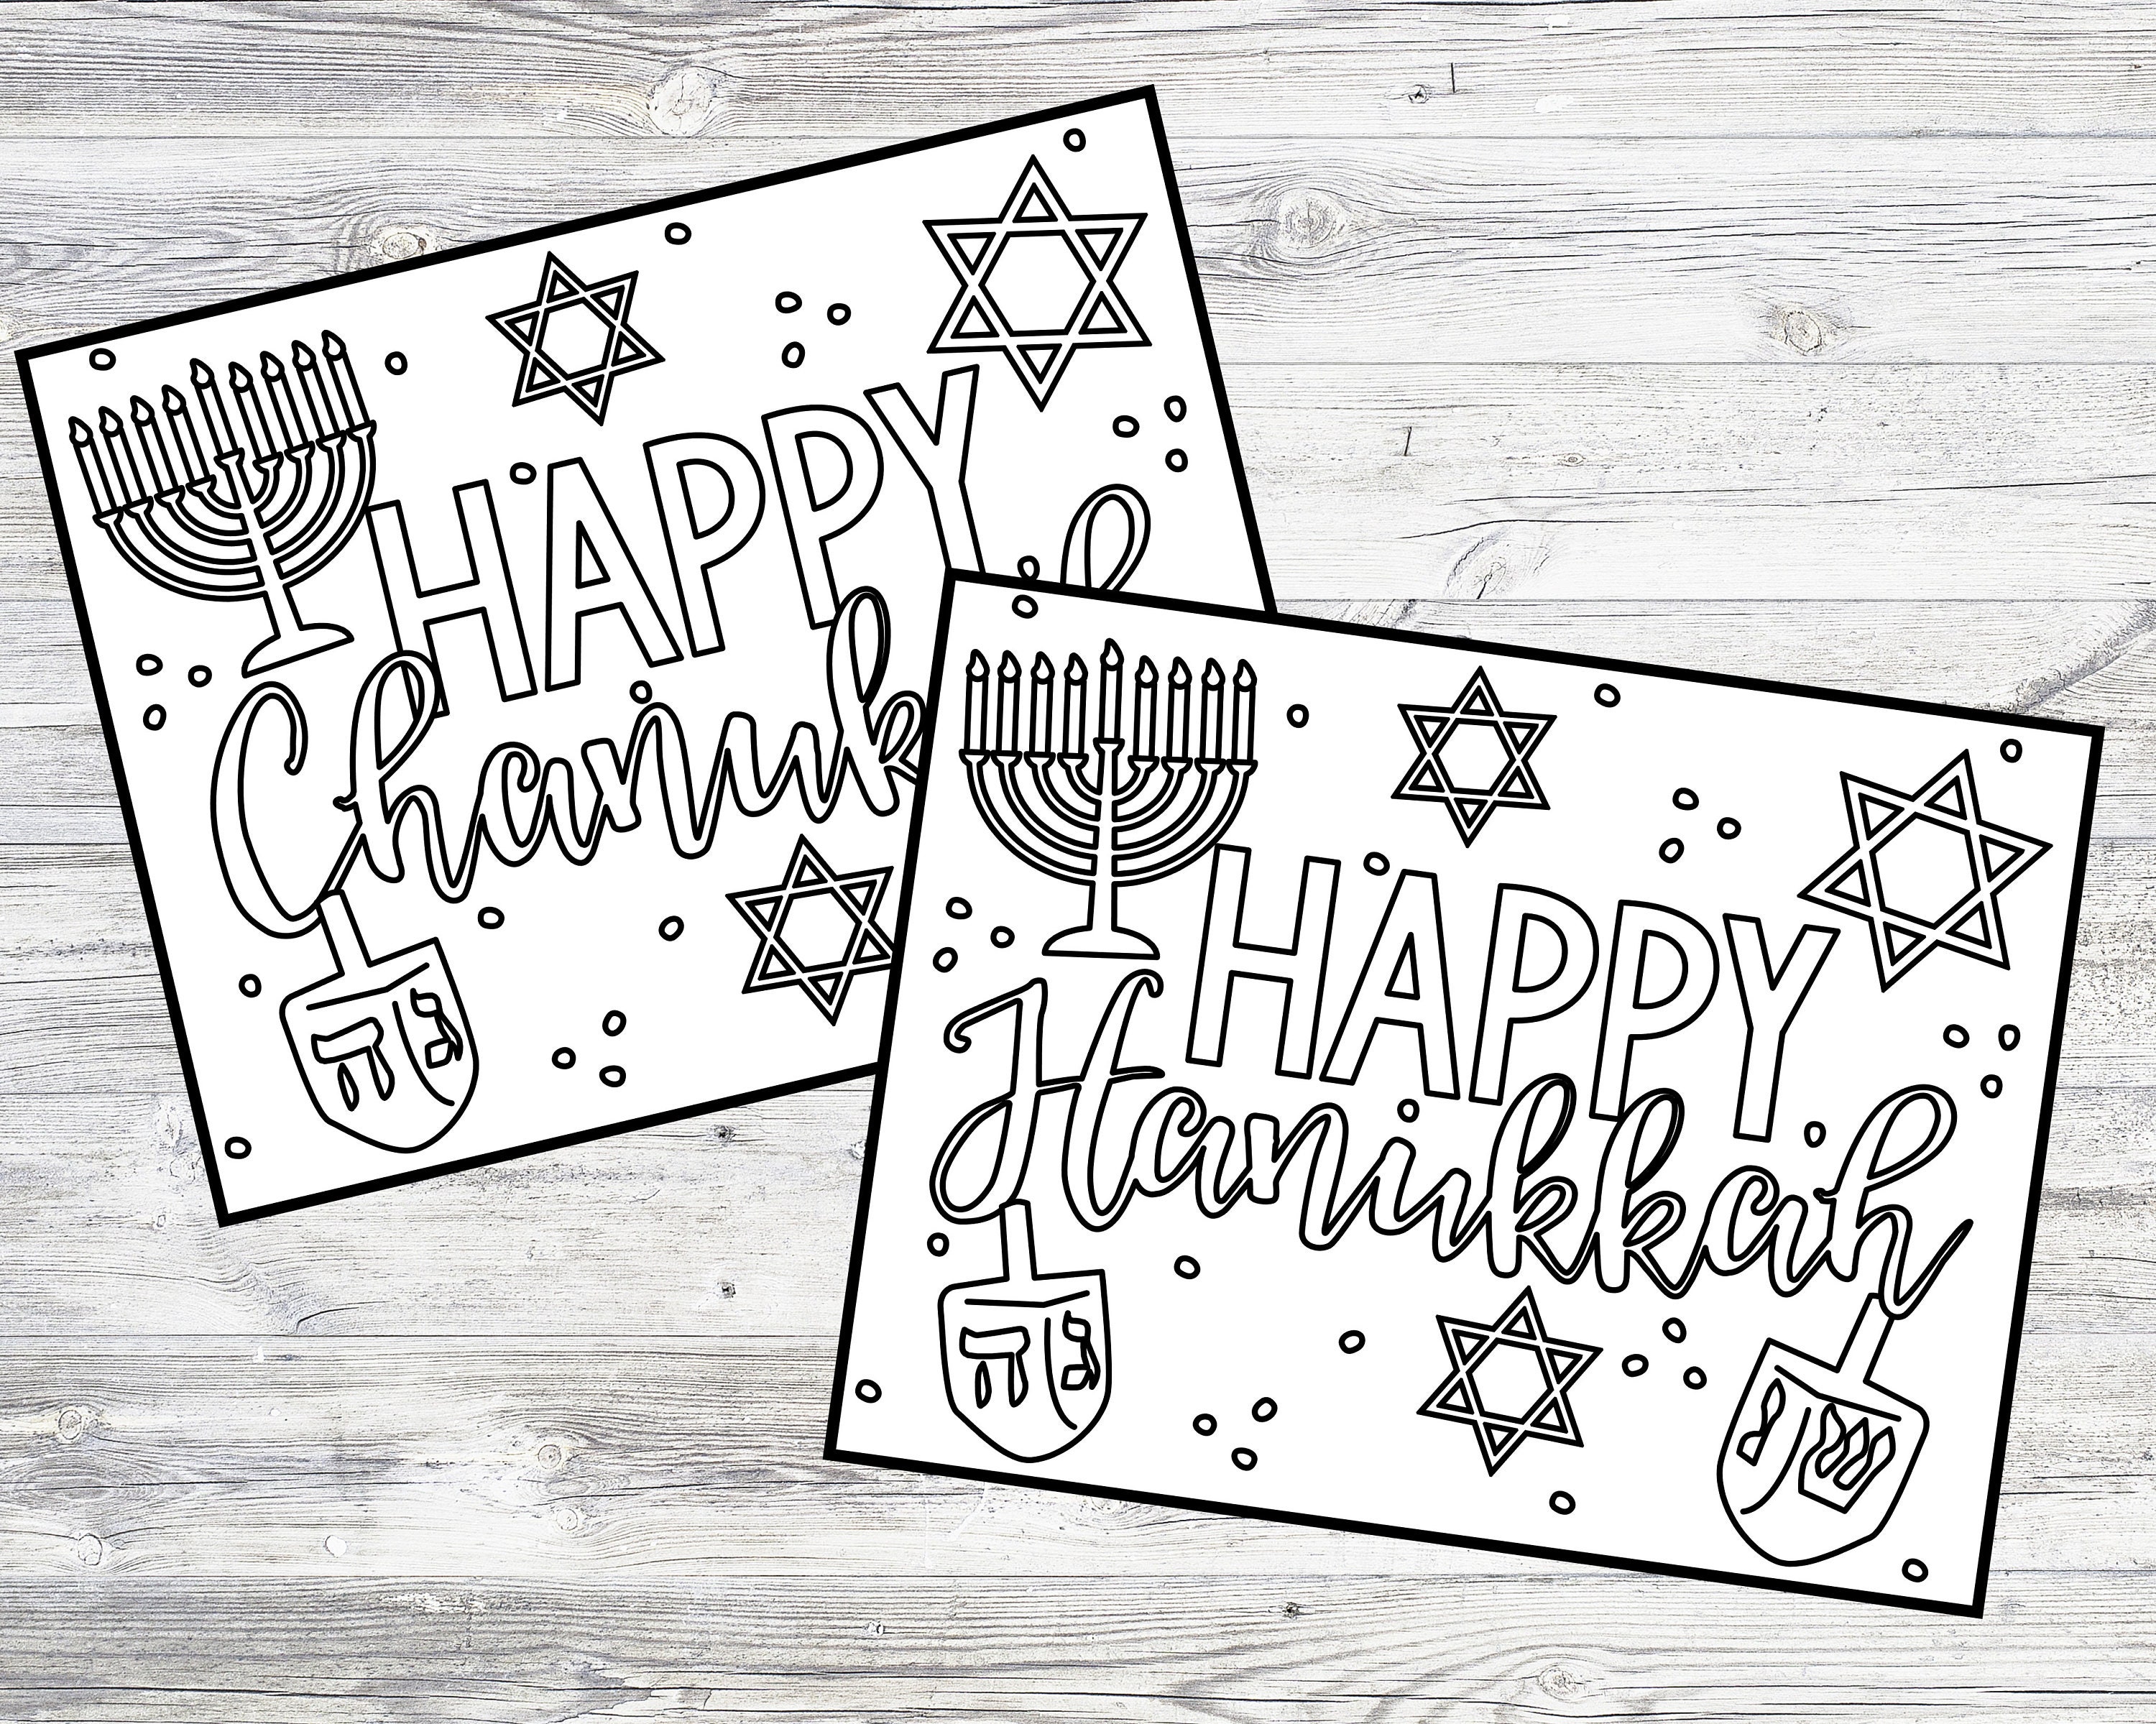 Chanukah Coloring Book for Children +Fun Facts about the Holiday & Its  Celebration: Happy Hanukkah Activity Book for Kids ages 4-8 with 30 Fun  Colorin (Paperback)